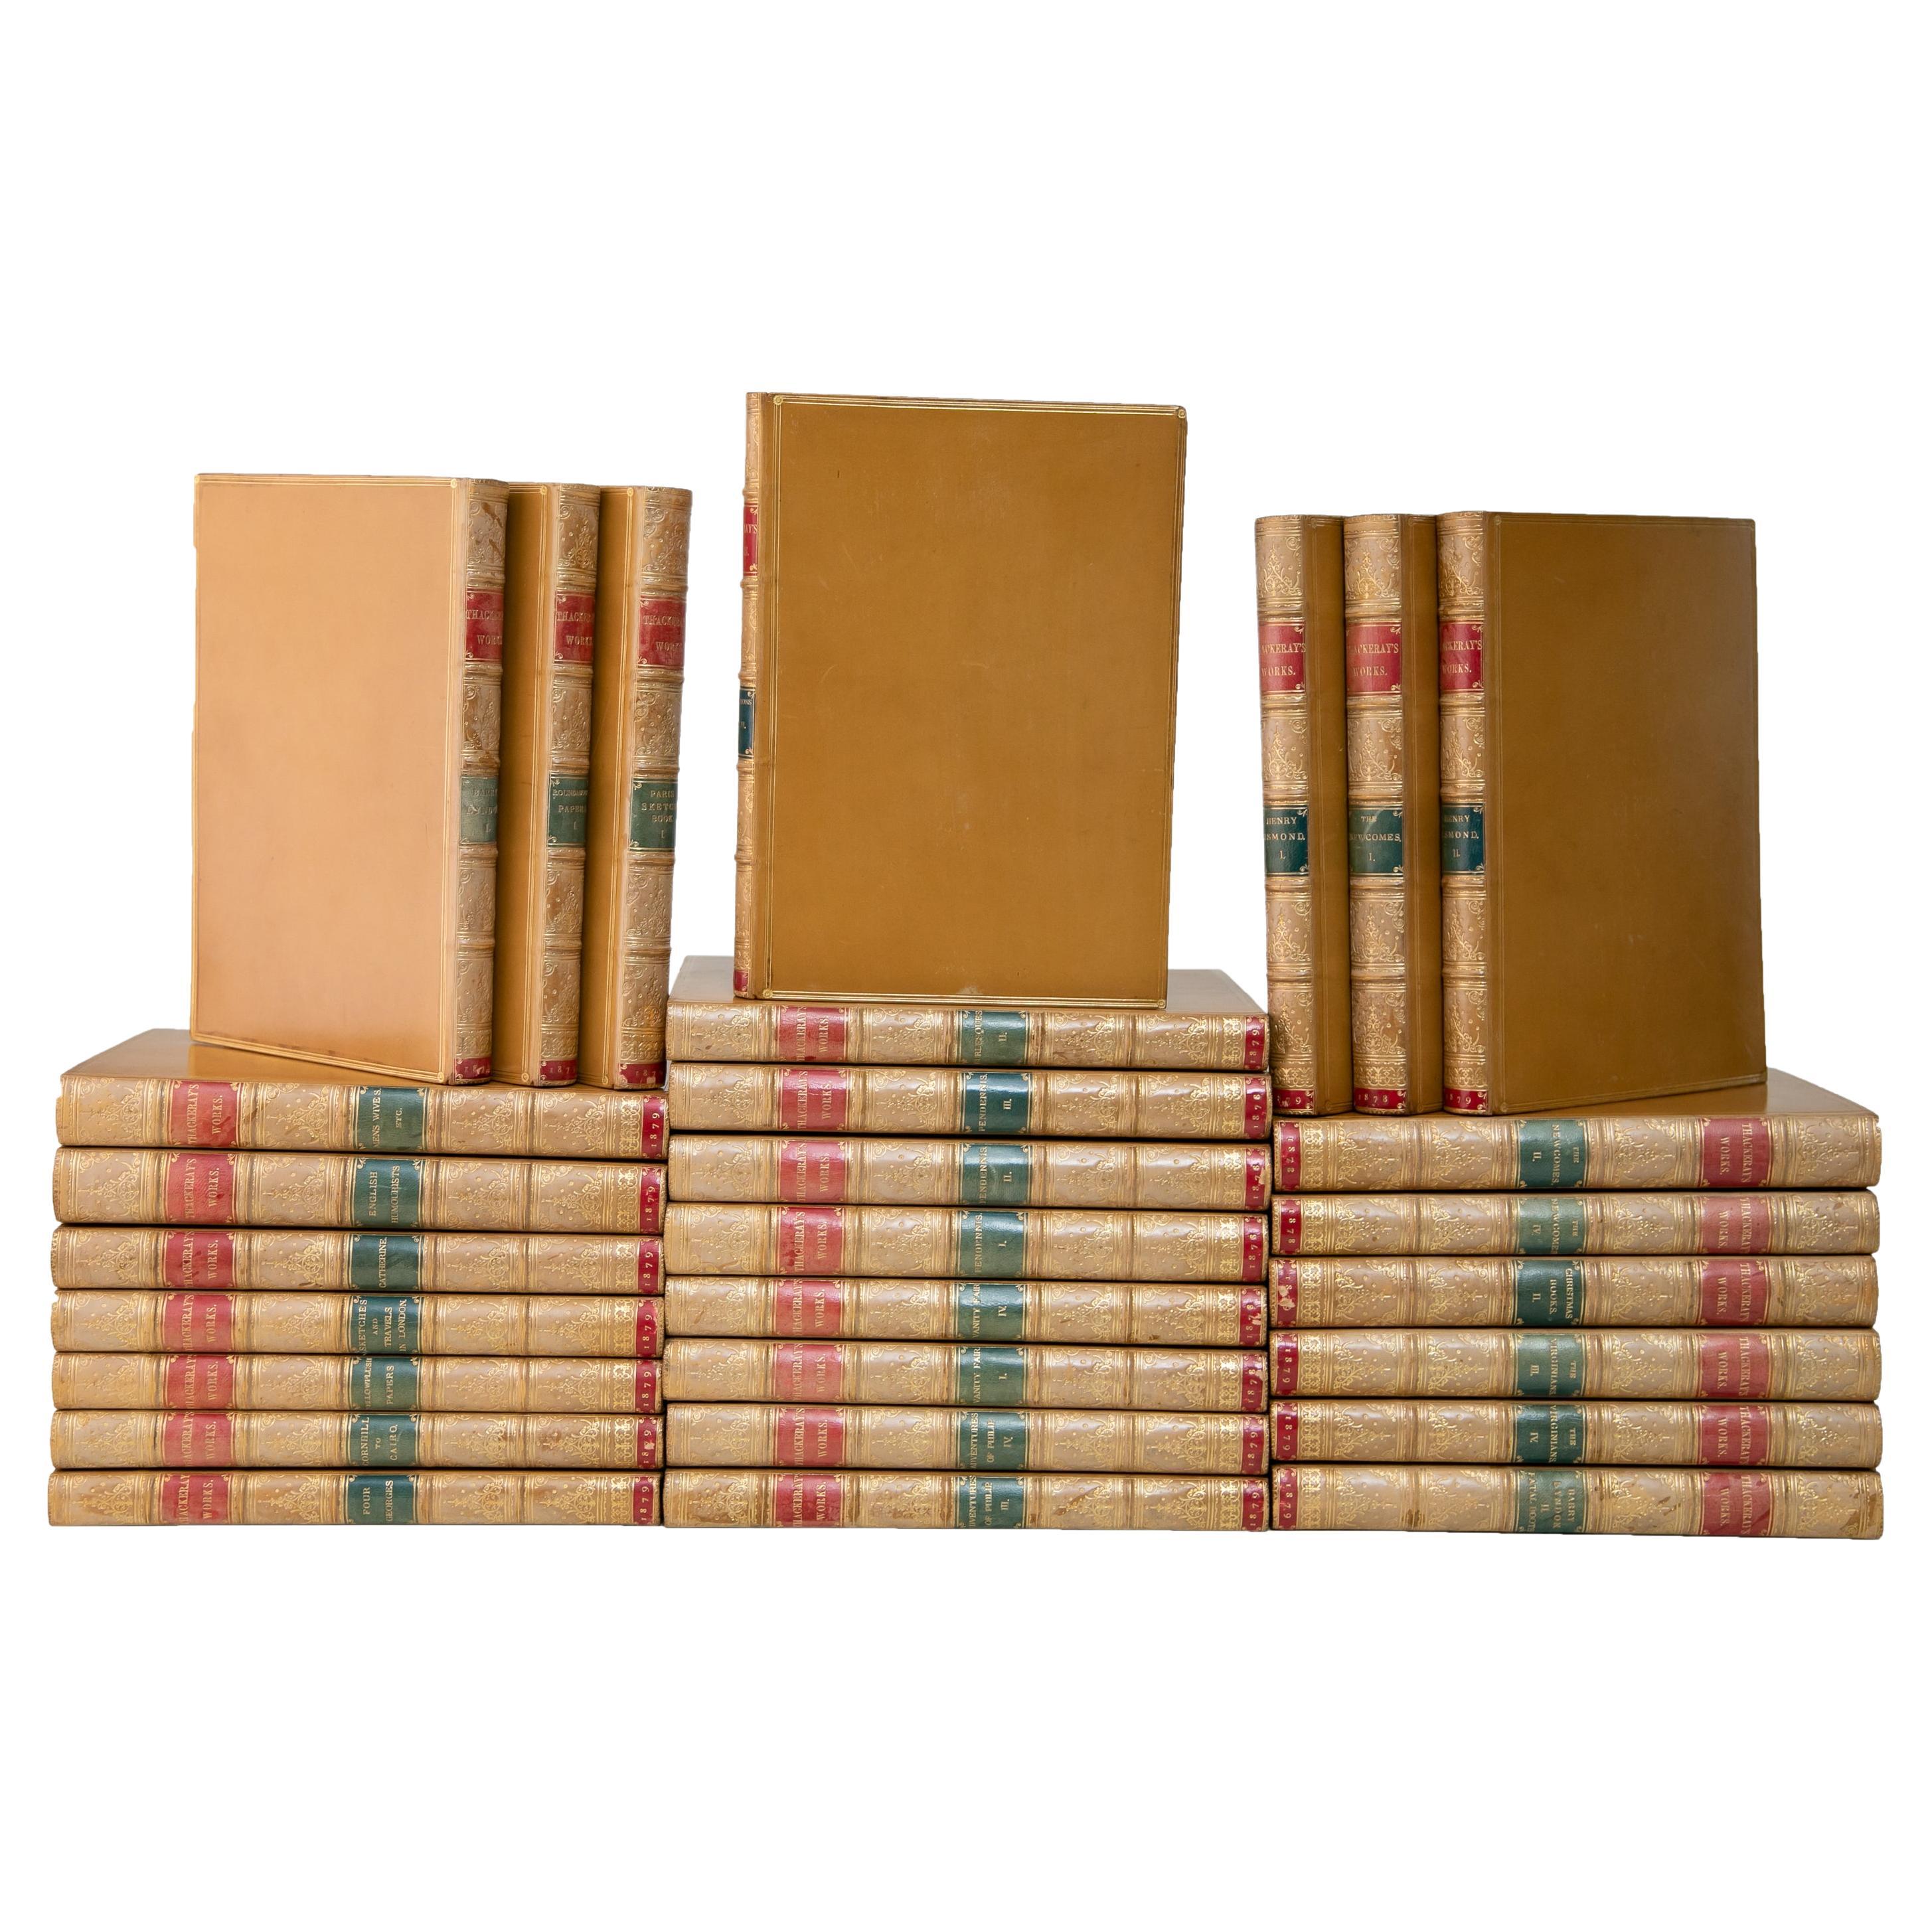 52 Volumes, William Makepeace Thackeray, the Works